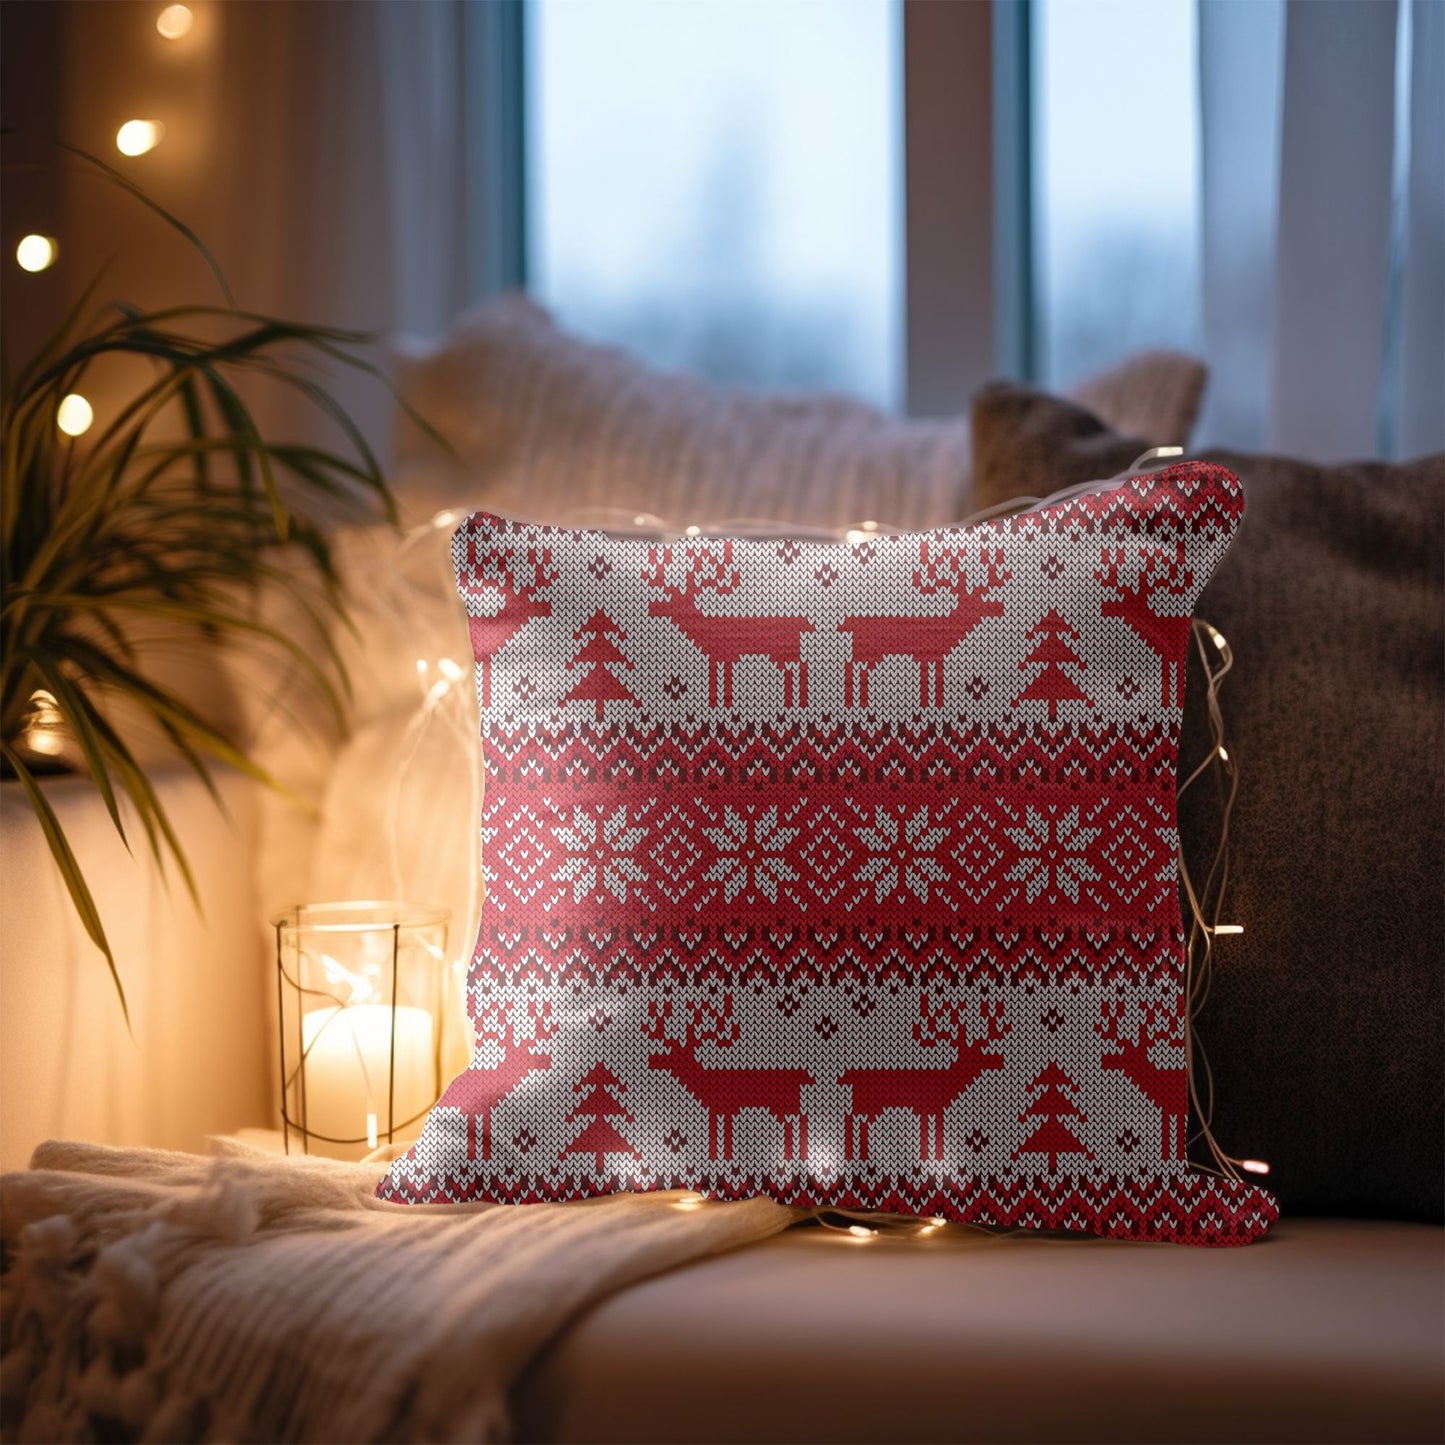 Adorable Red Reindeer-Themed Cushion Cover